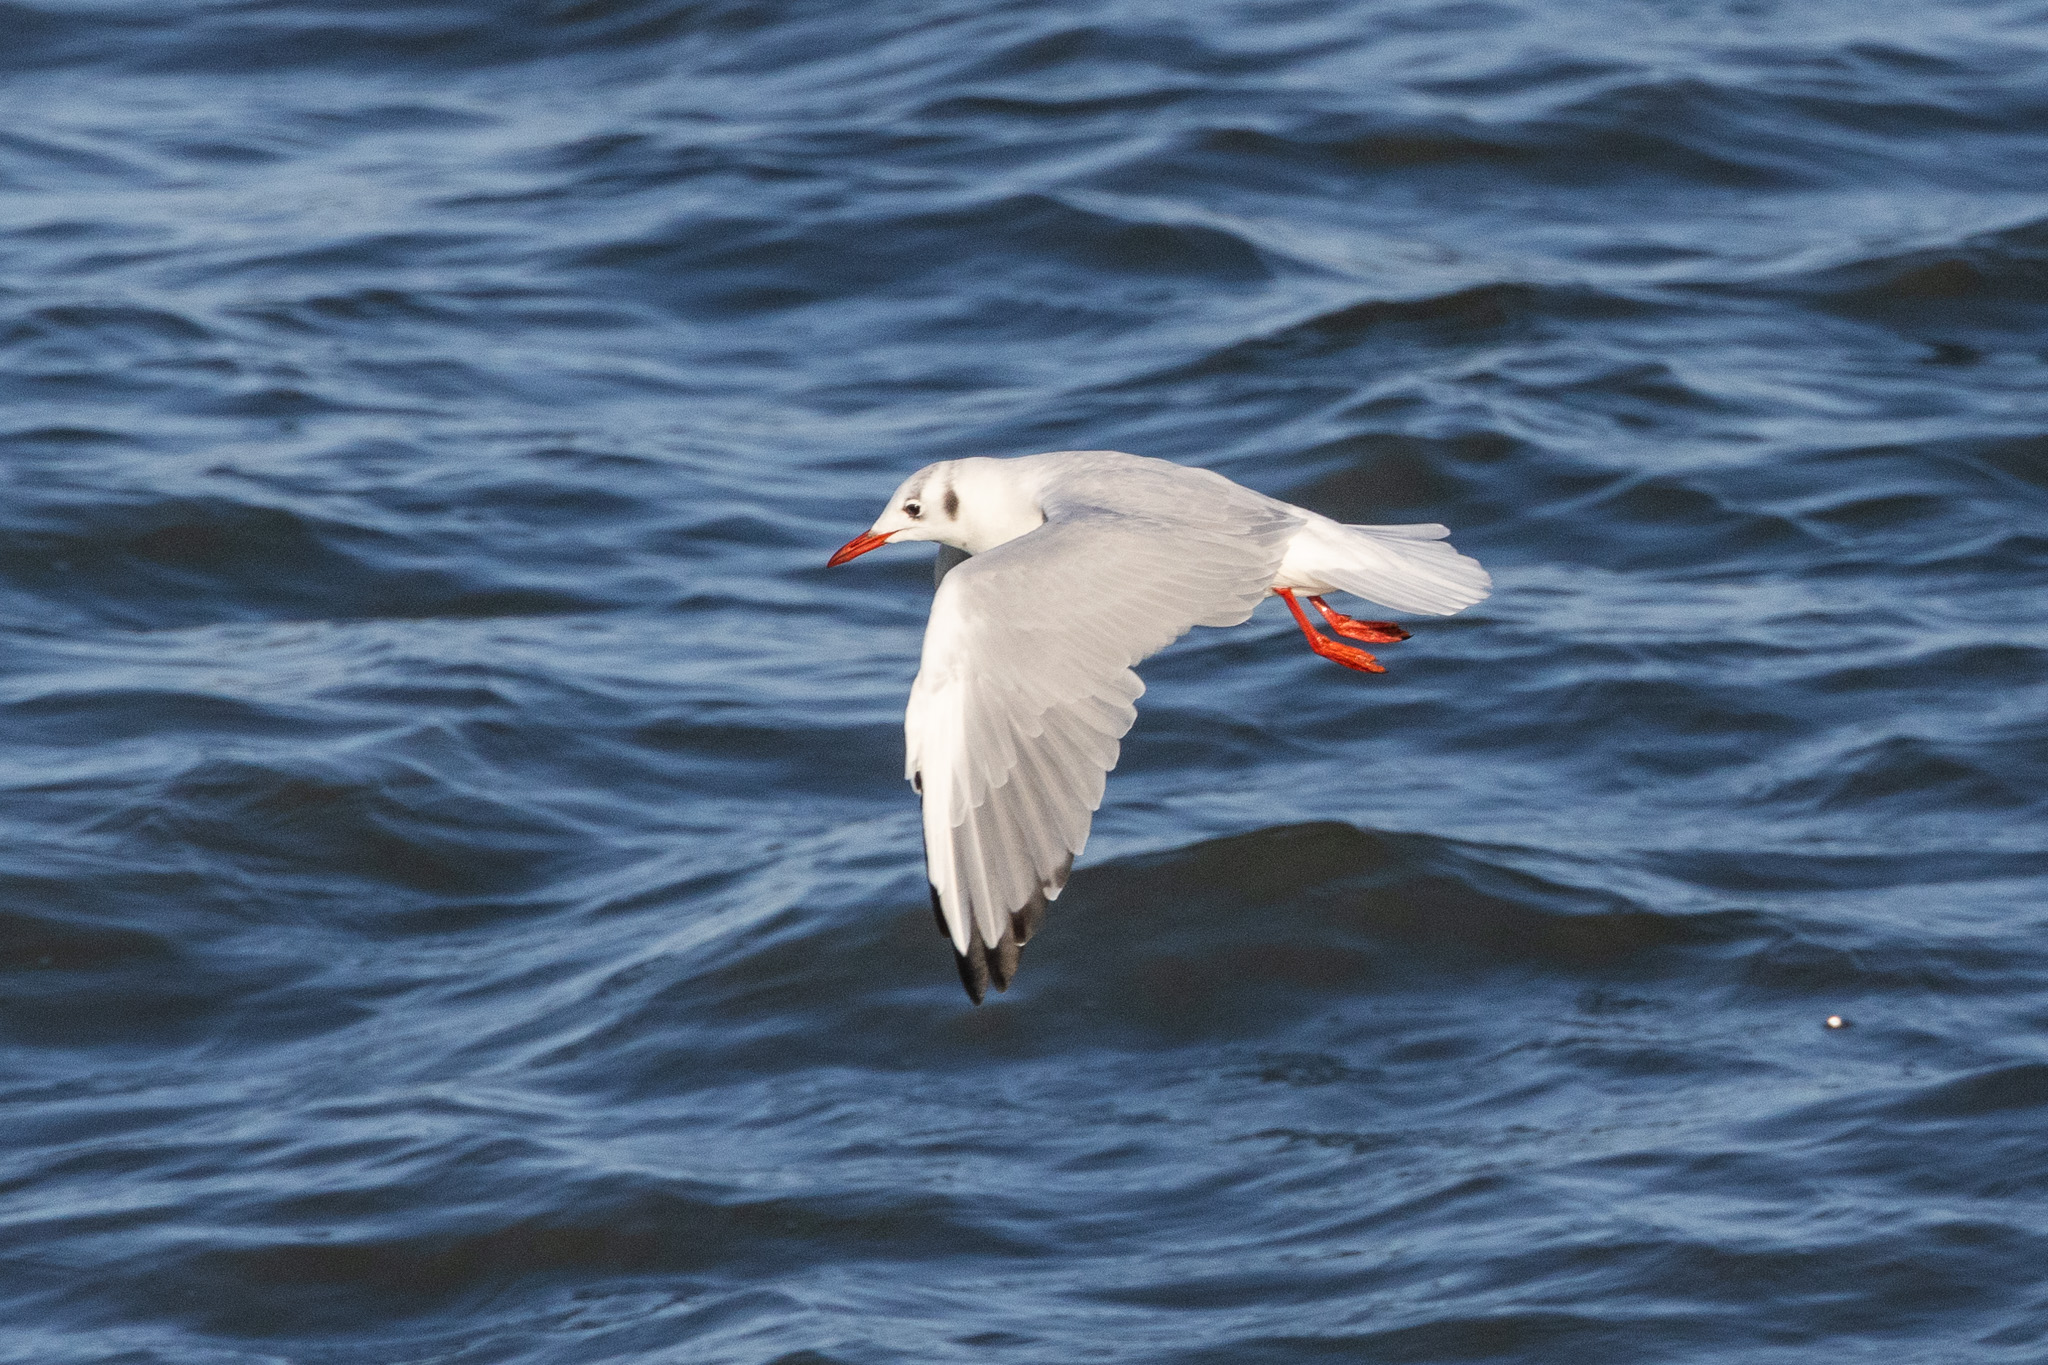 A Black-headed Gull flies low over the water